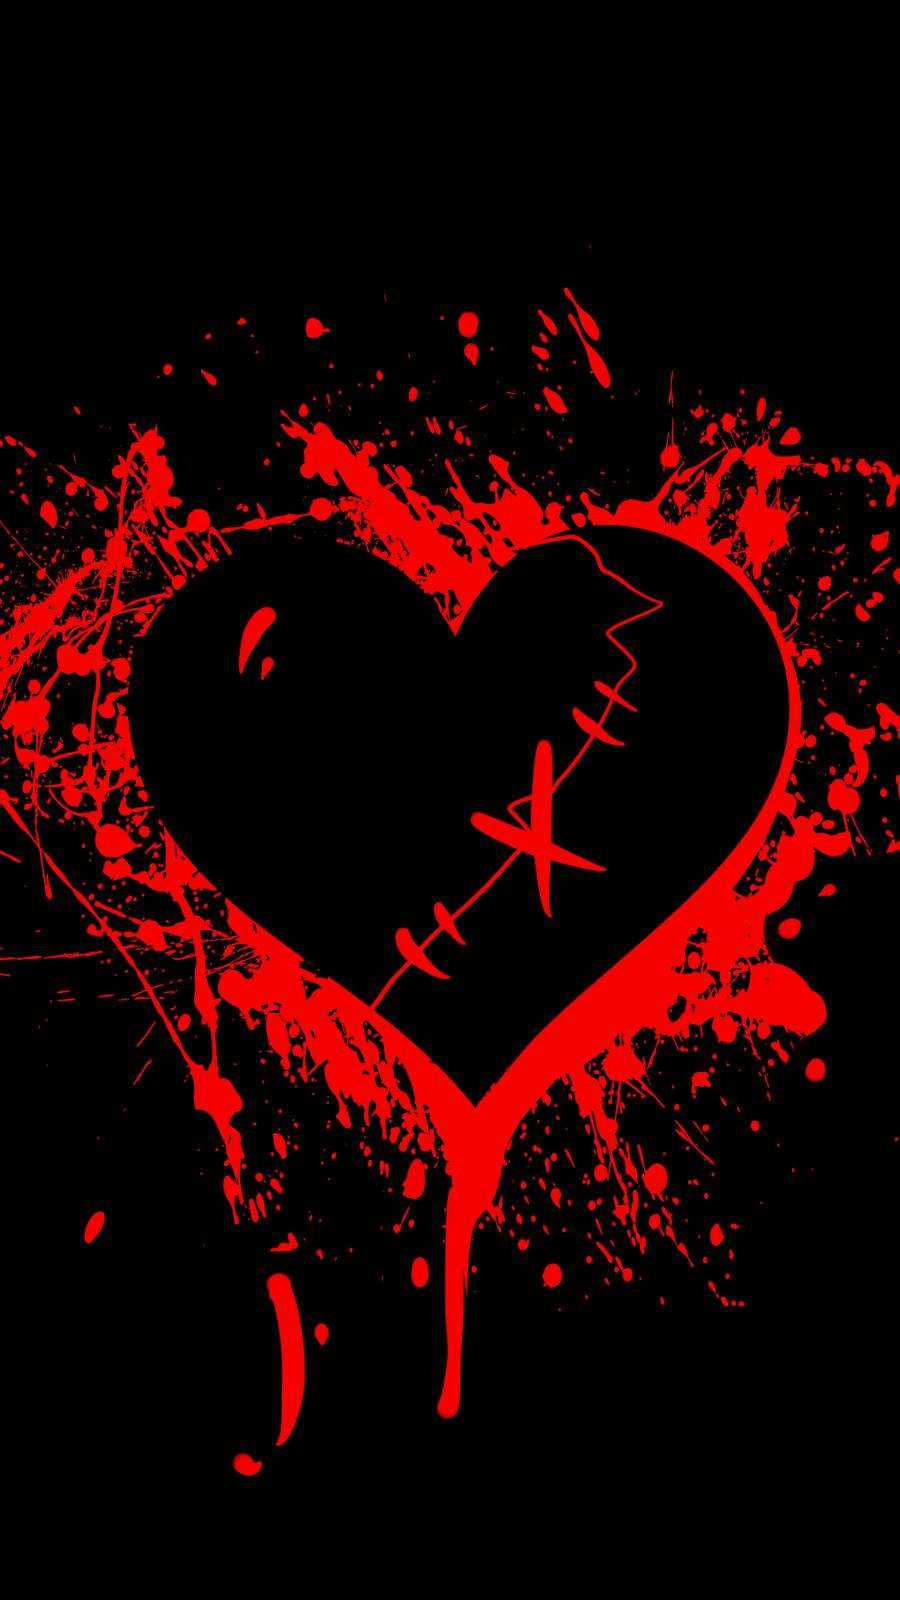 Black and red heart on a black background - Black heart